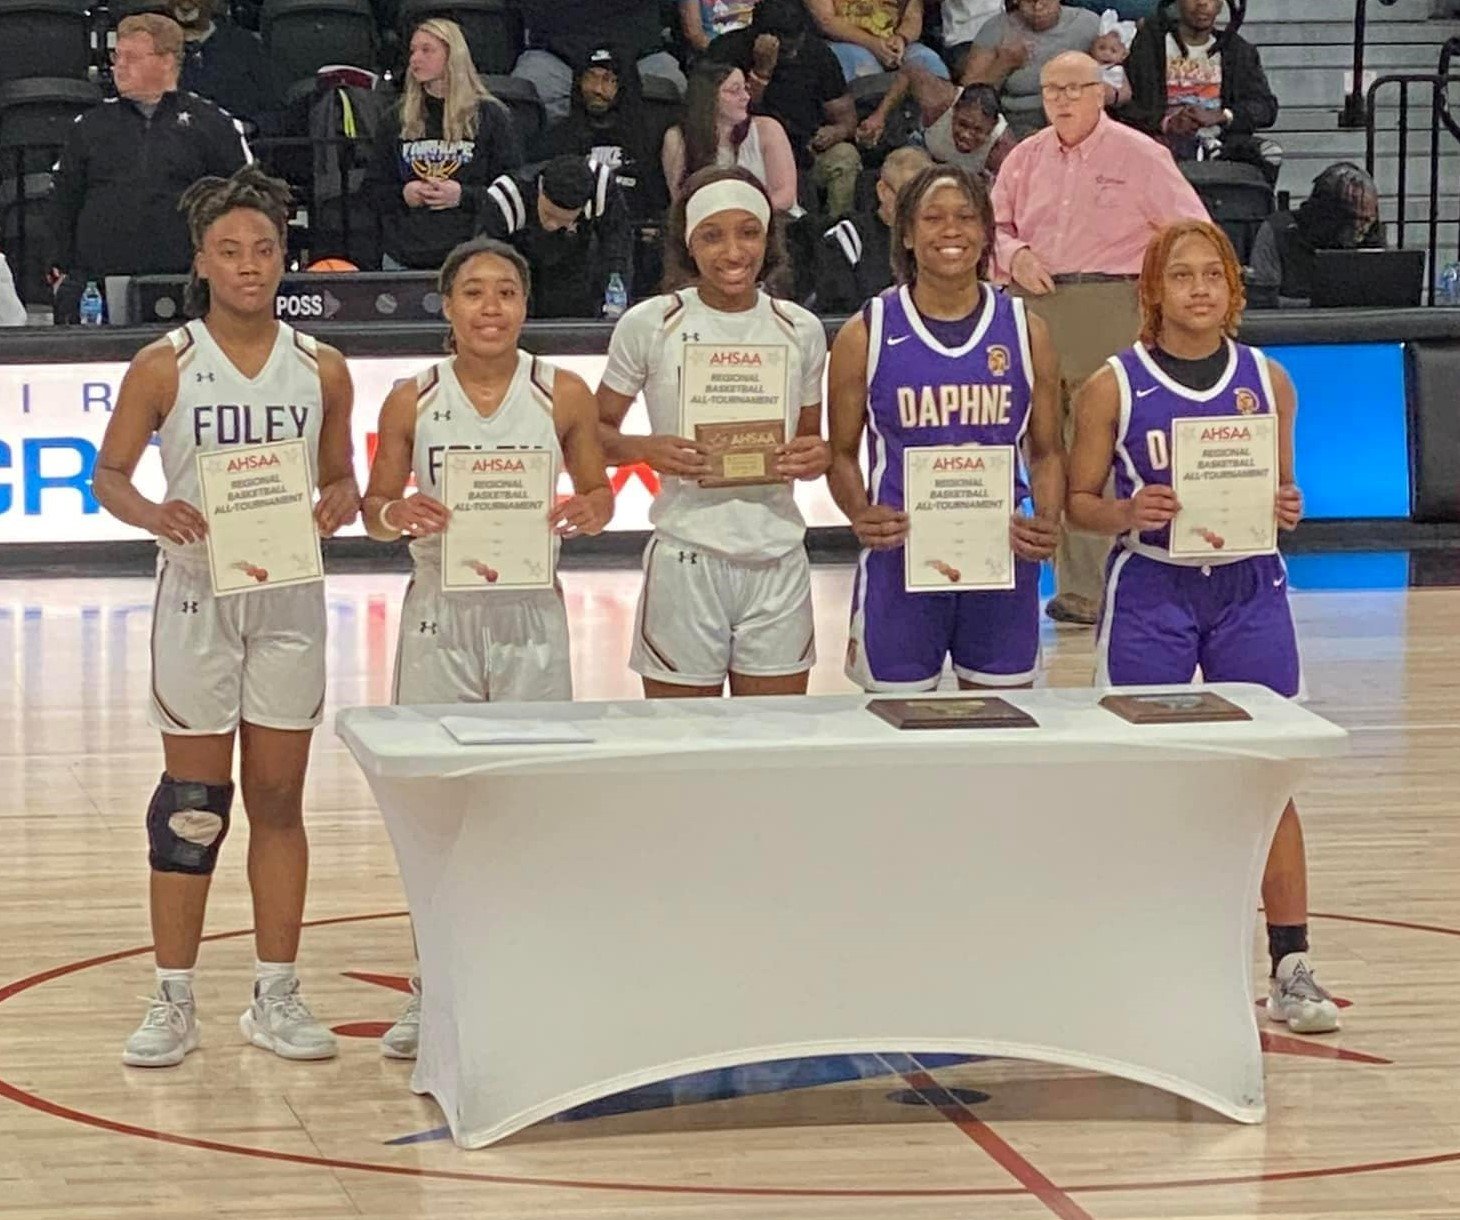 Keiyonla Knight, Ashauntee Hobbs and Jestiny Dixon from Foley, as well as La’Merrica Johnson and Abby Johnson from Daphne, represented Baldwin County on the all-regional tournament team this postseason where the Lions and Trojans met in Class 7A’s Central championship. Hobbs and La’Merrica Johnson were recently named to the AHSAA South All-Star roster ahead of this summer’s North-South game.